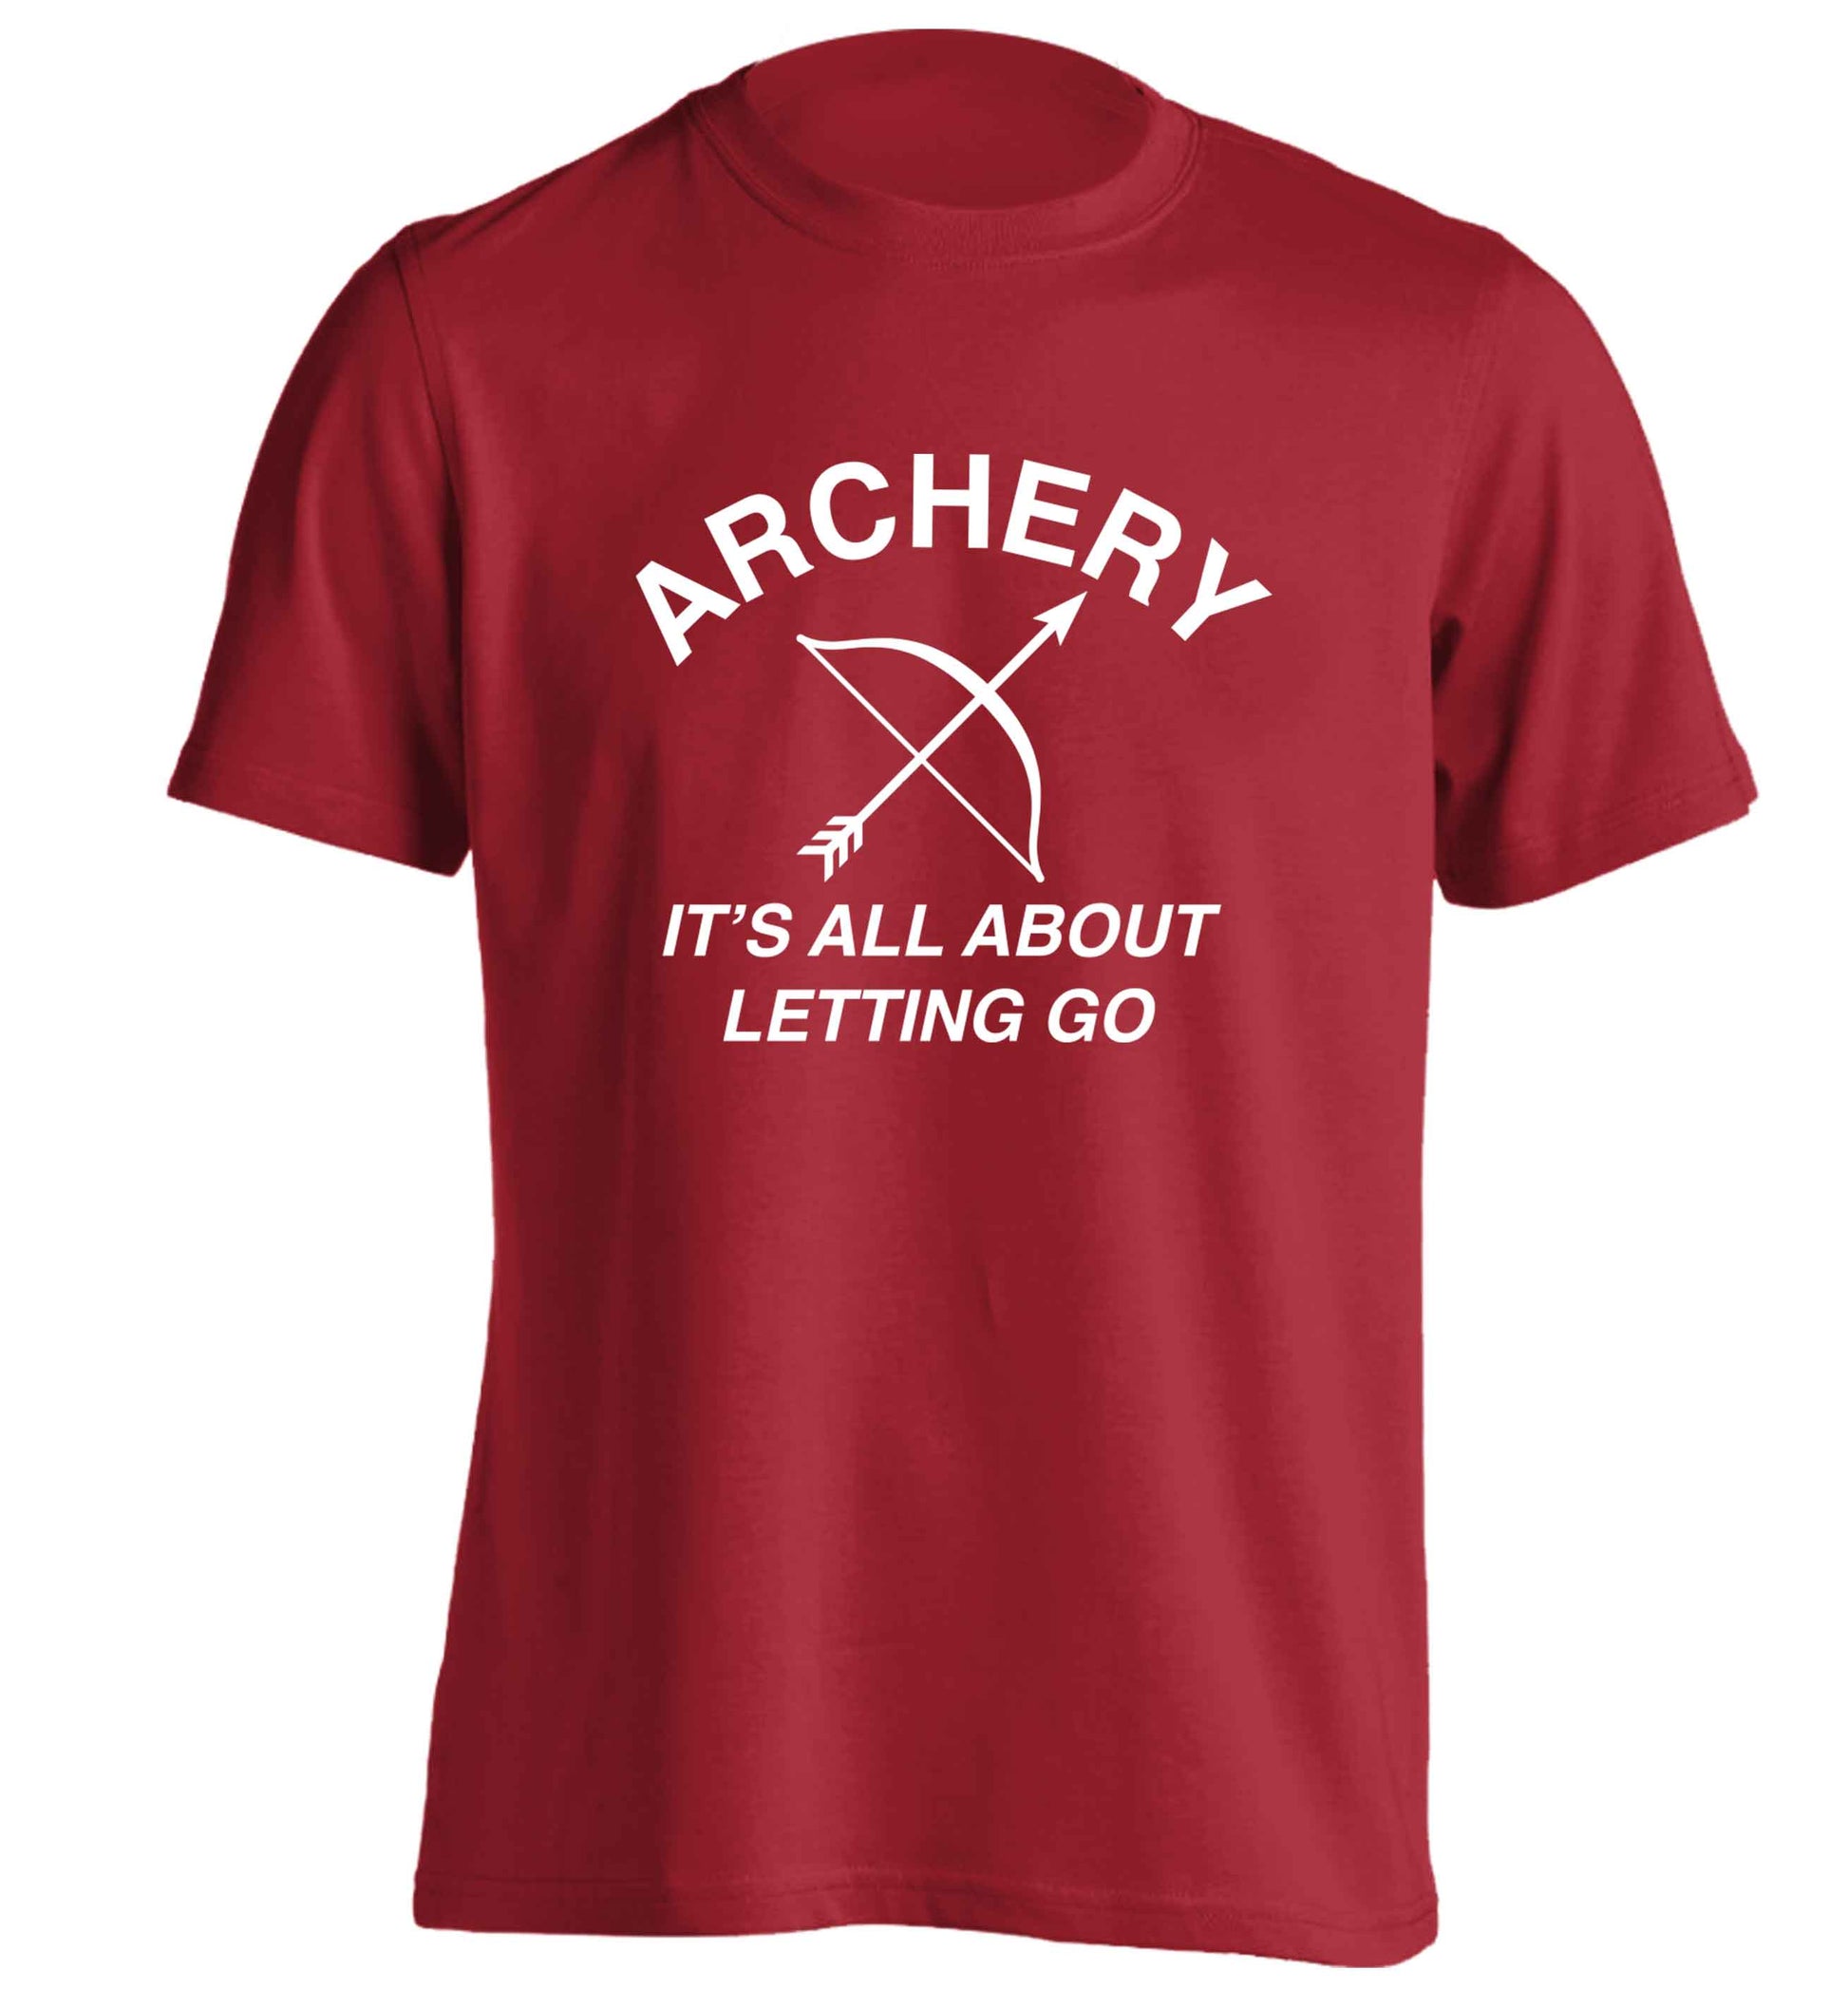 Archery it's all about letting go adults unisex red Tshirt 2XL